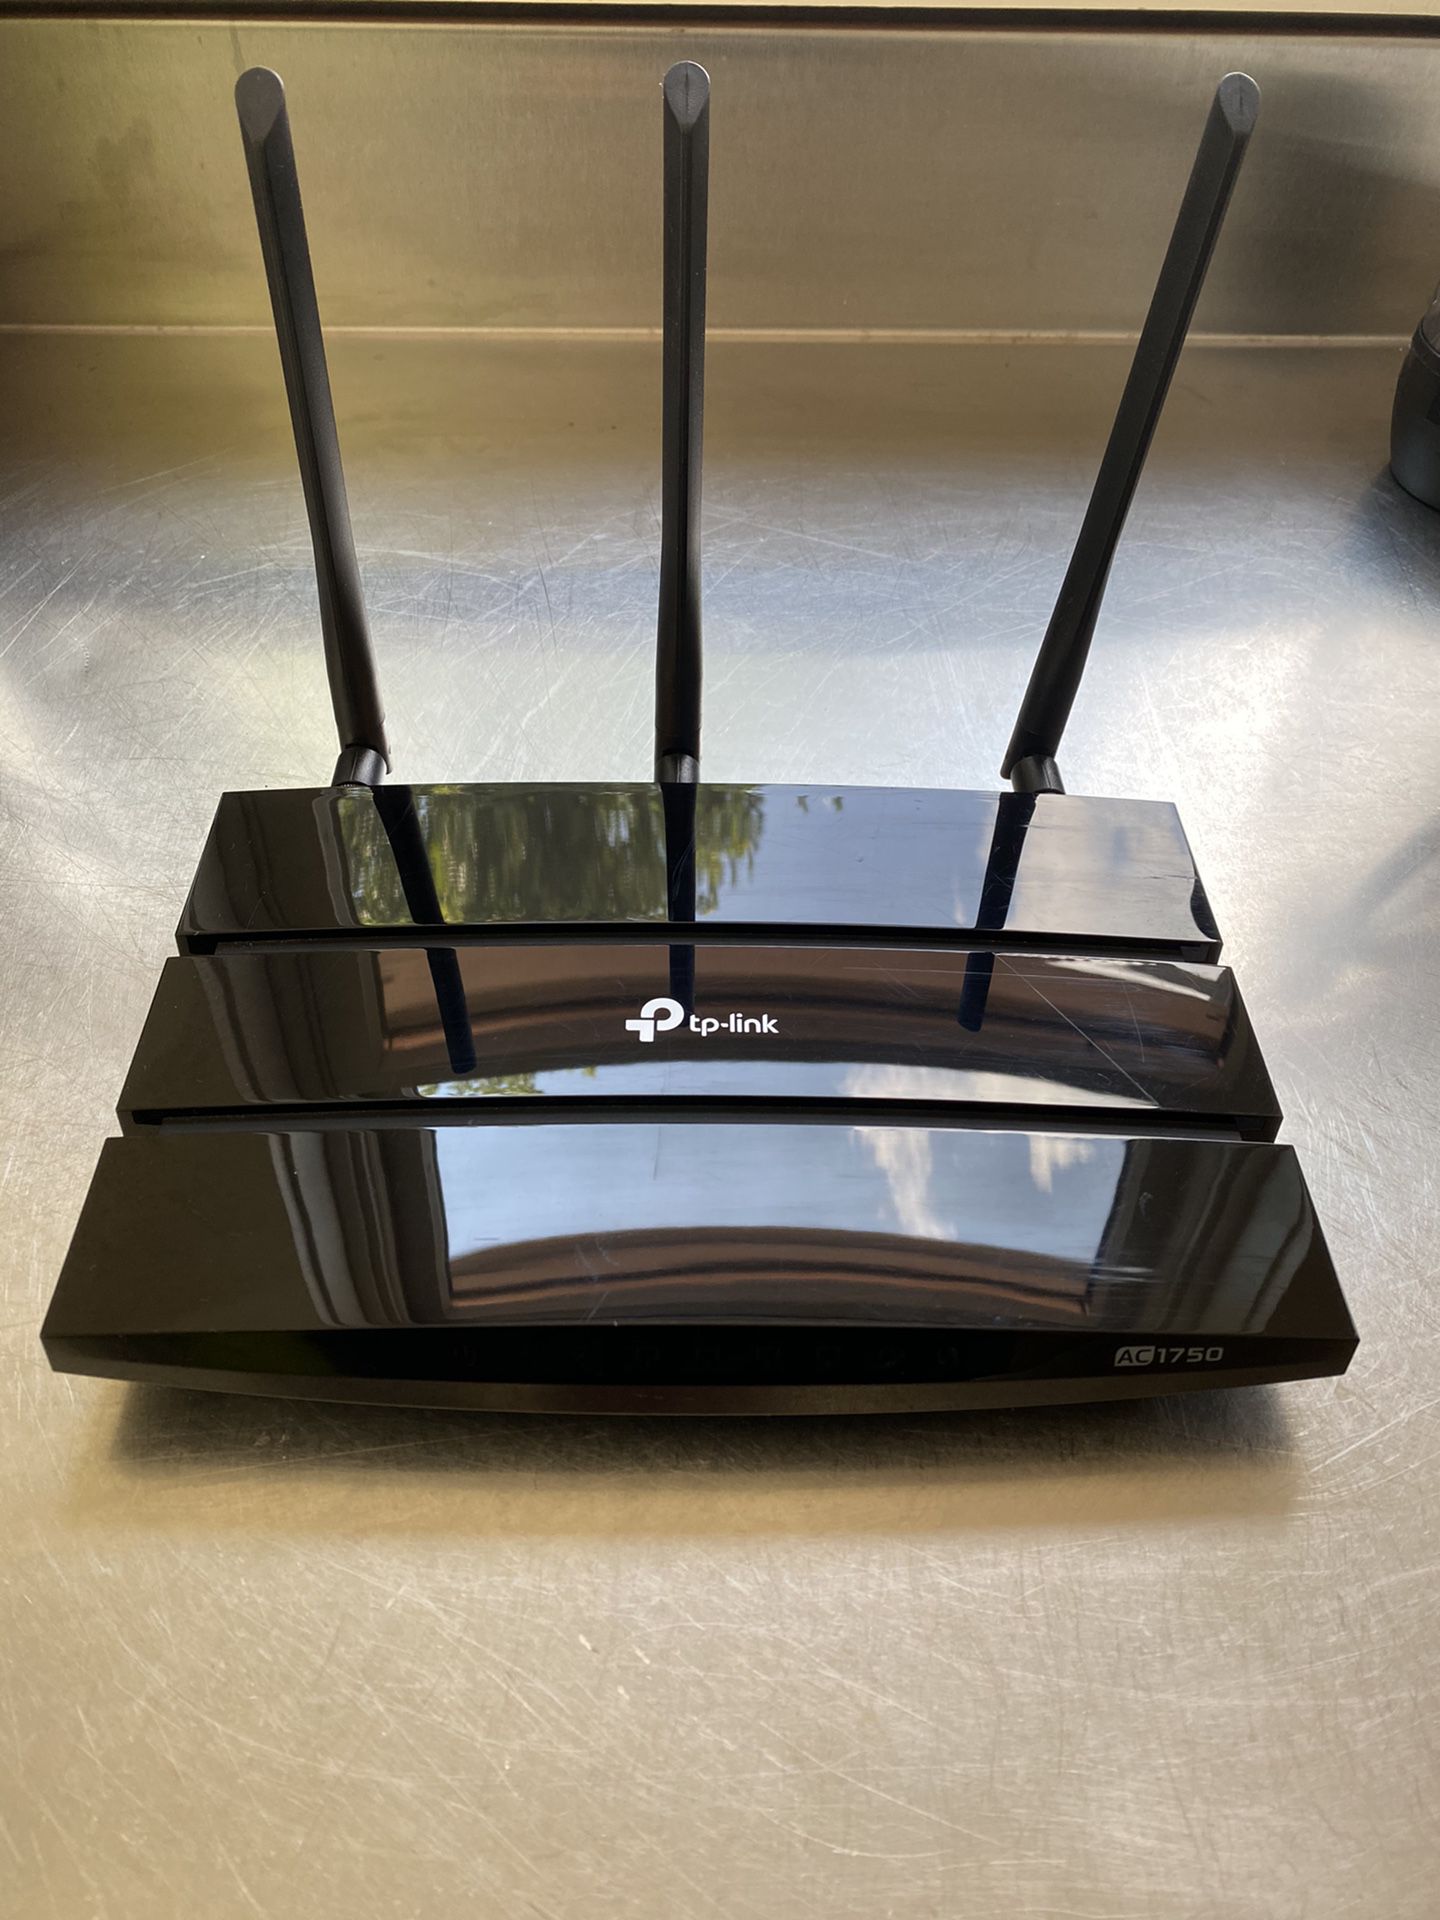 Gig speed wireless router that has long range